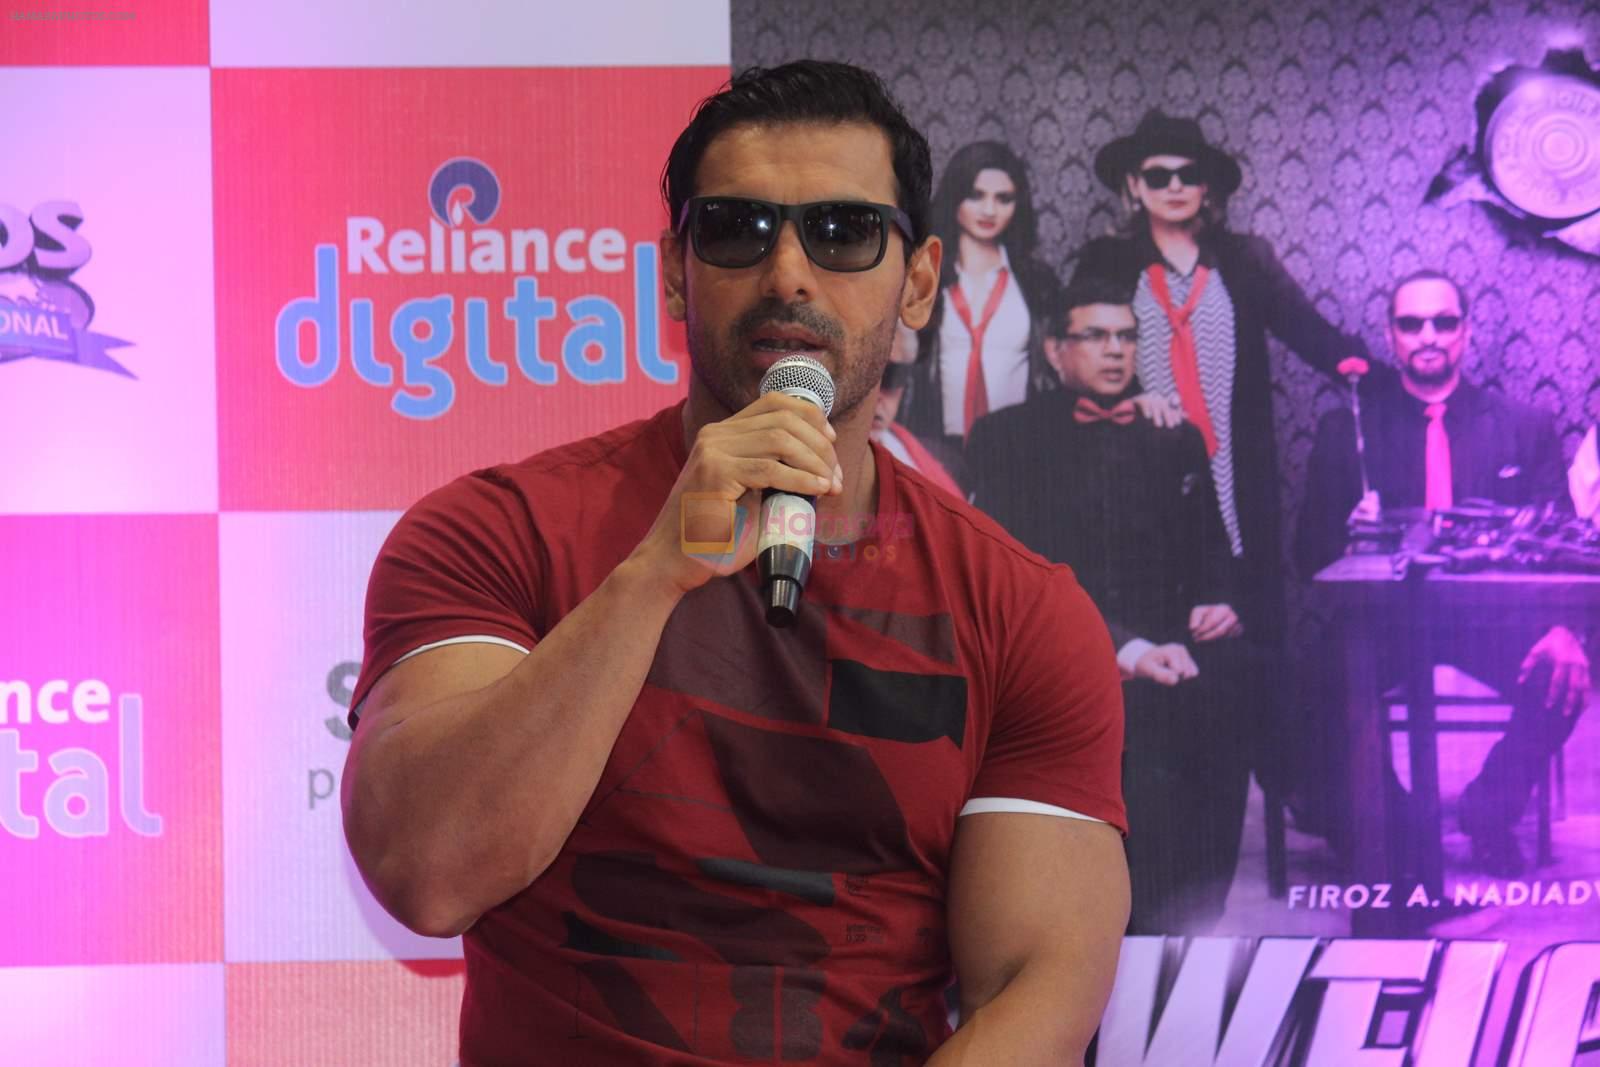 John Abraham at Welcome Back promotions in Reliance Digital, Juhu on 29th Aug 2015